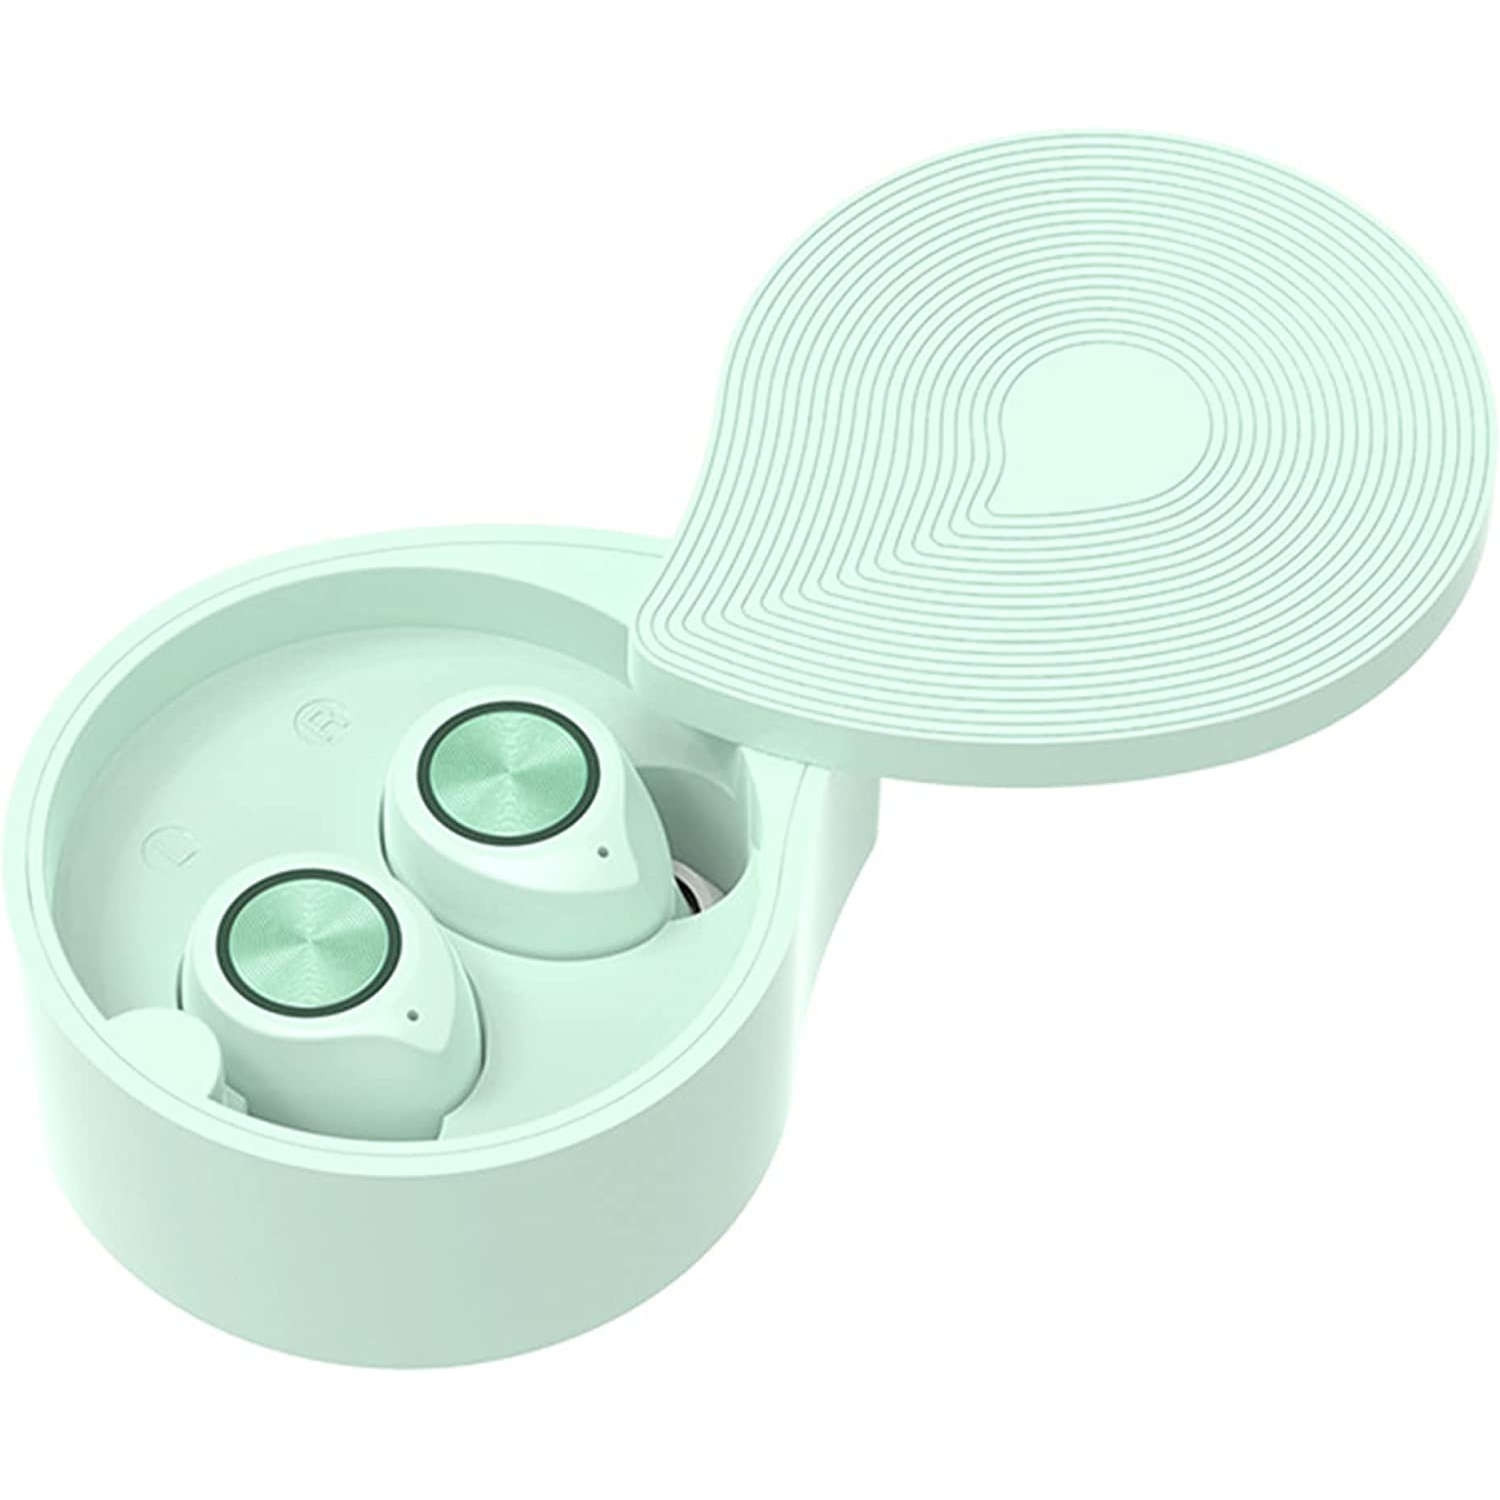 Dolaer TWS Mini Earbuds for Kids, BT 5.0 in Ear Earphone with Cute Water Drop Design Charging Case and Noise Reduction Mic, HiFi Stereo Sounds, Touch Control, Waterproof headphones